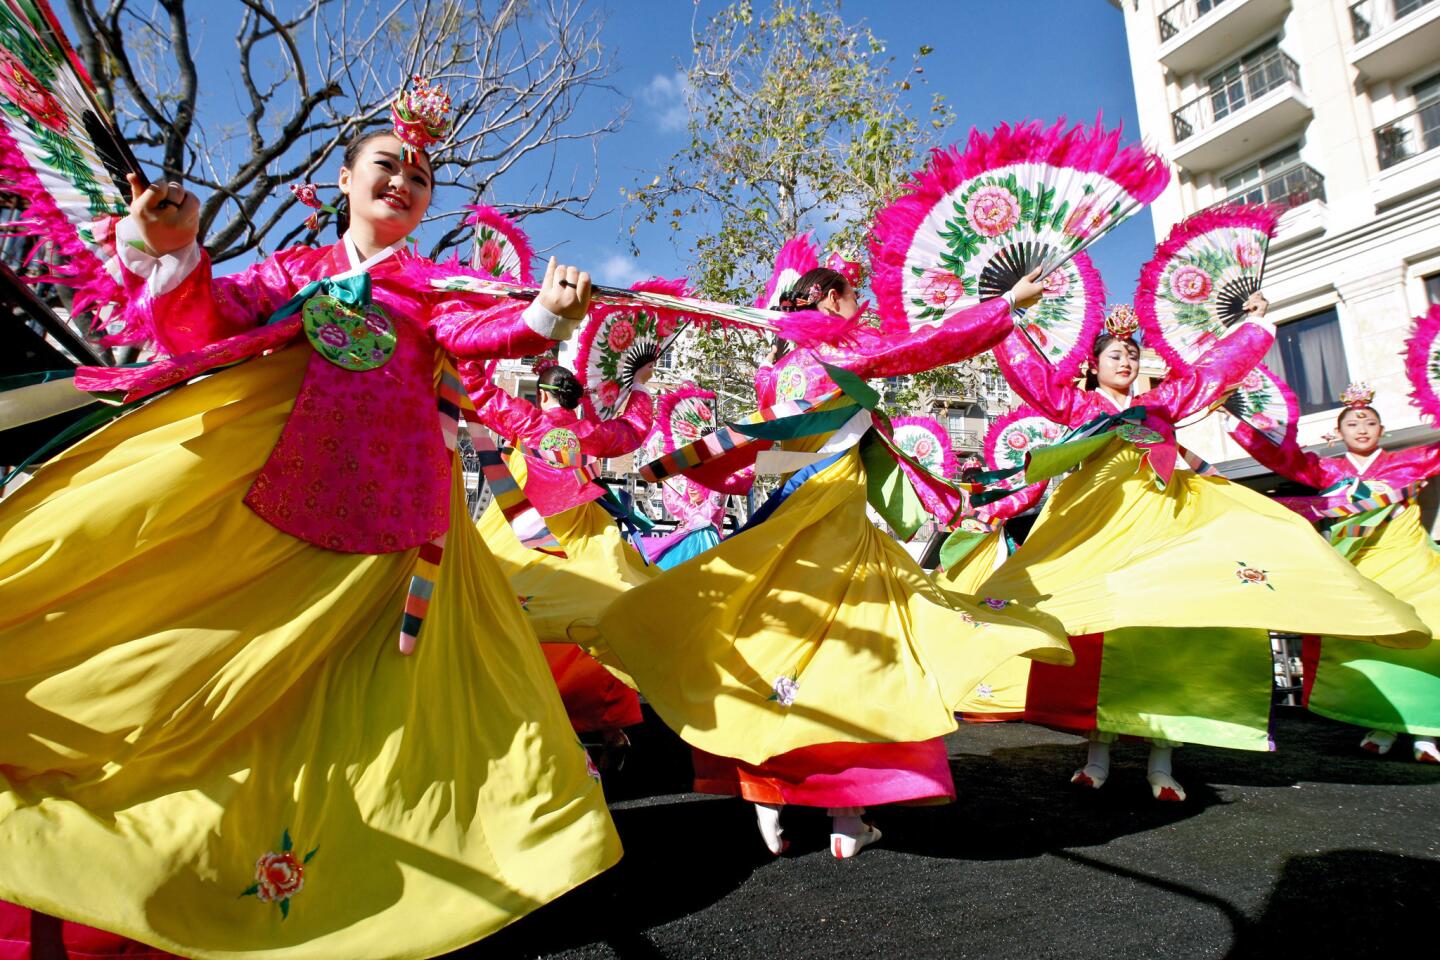 Members of the Kim Eung Hwa Dance Academy perform the Fan Dance during the annual Lunar New Year celebration at the Americana at Brand in Glendale on Saturday, Feb. 4, 2017. Crowds were treated to a parade, performances along with games at the outdoor venue.